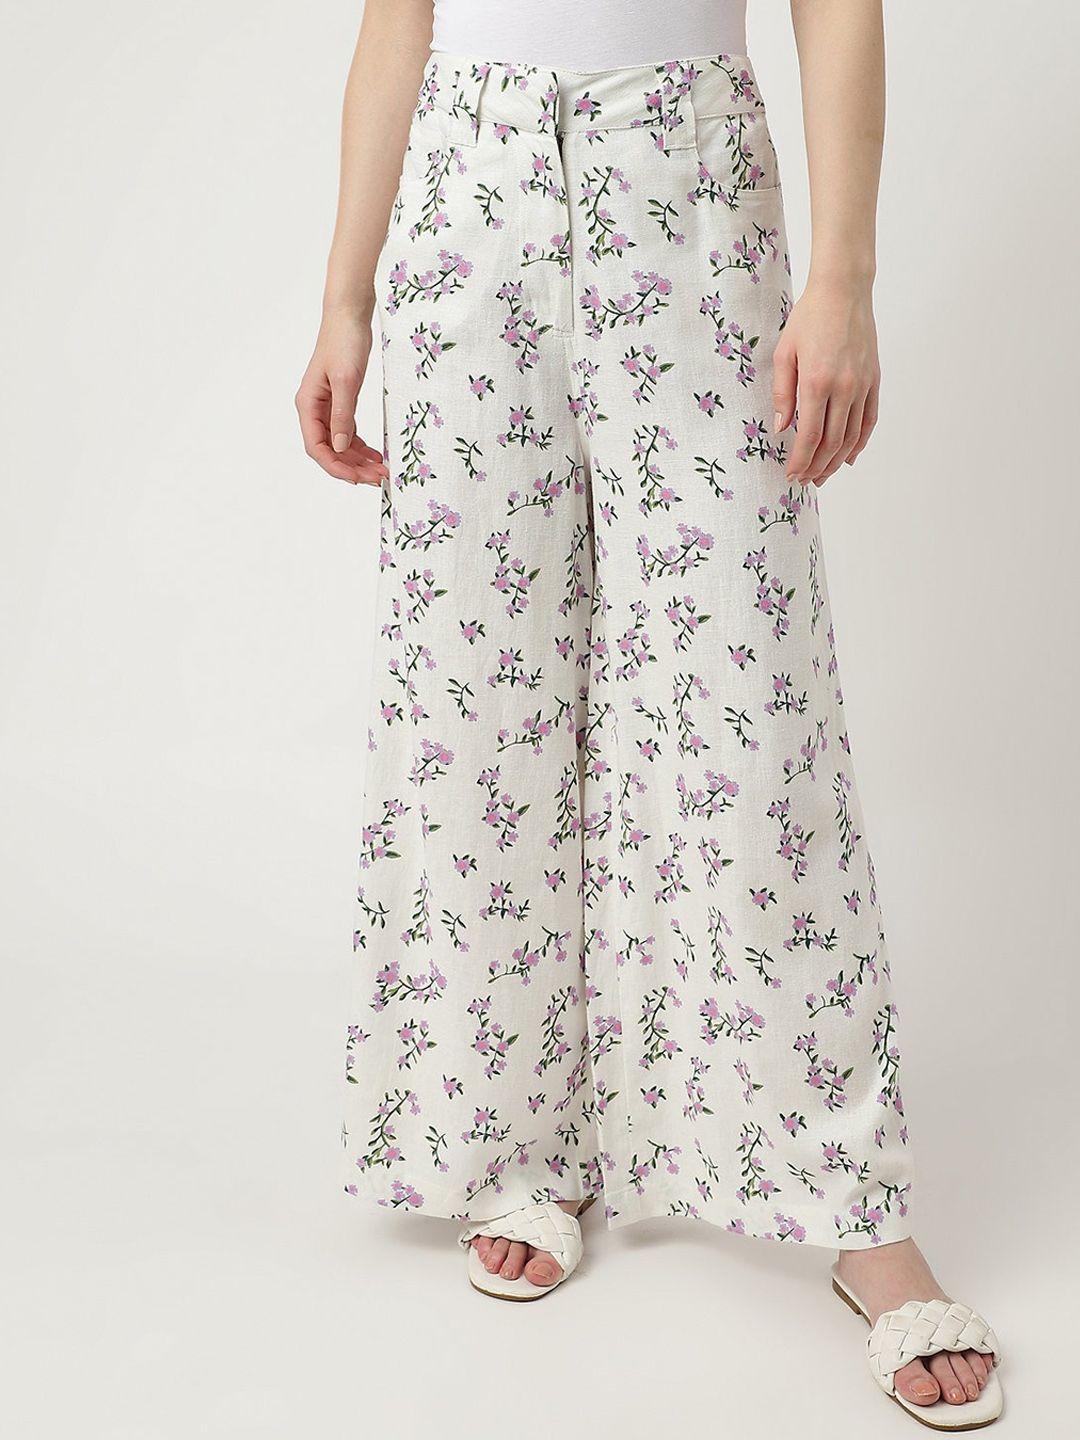 marks-&-spencer-women-floral-printed-high-rise-linen-trousers